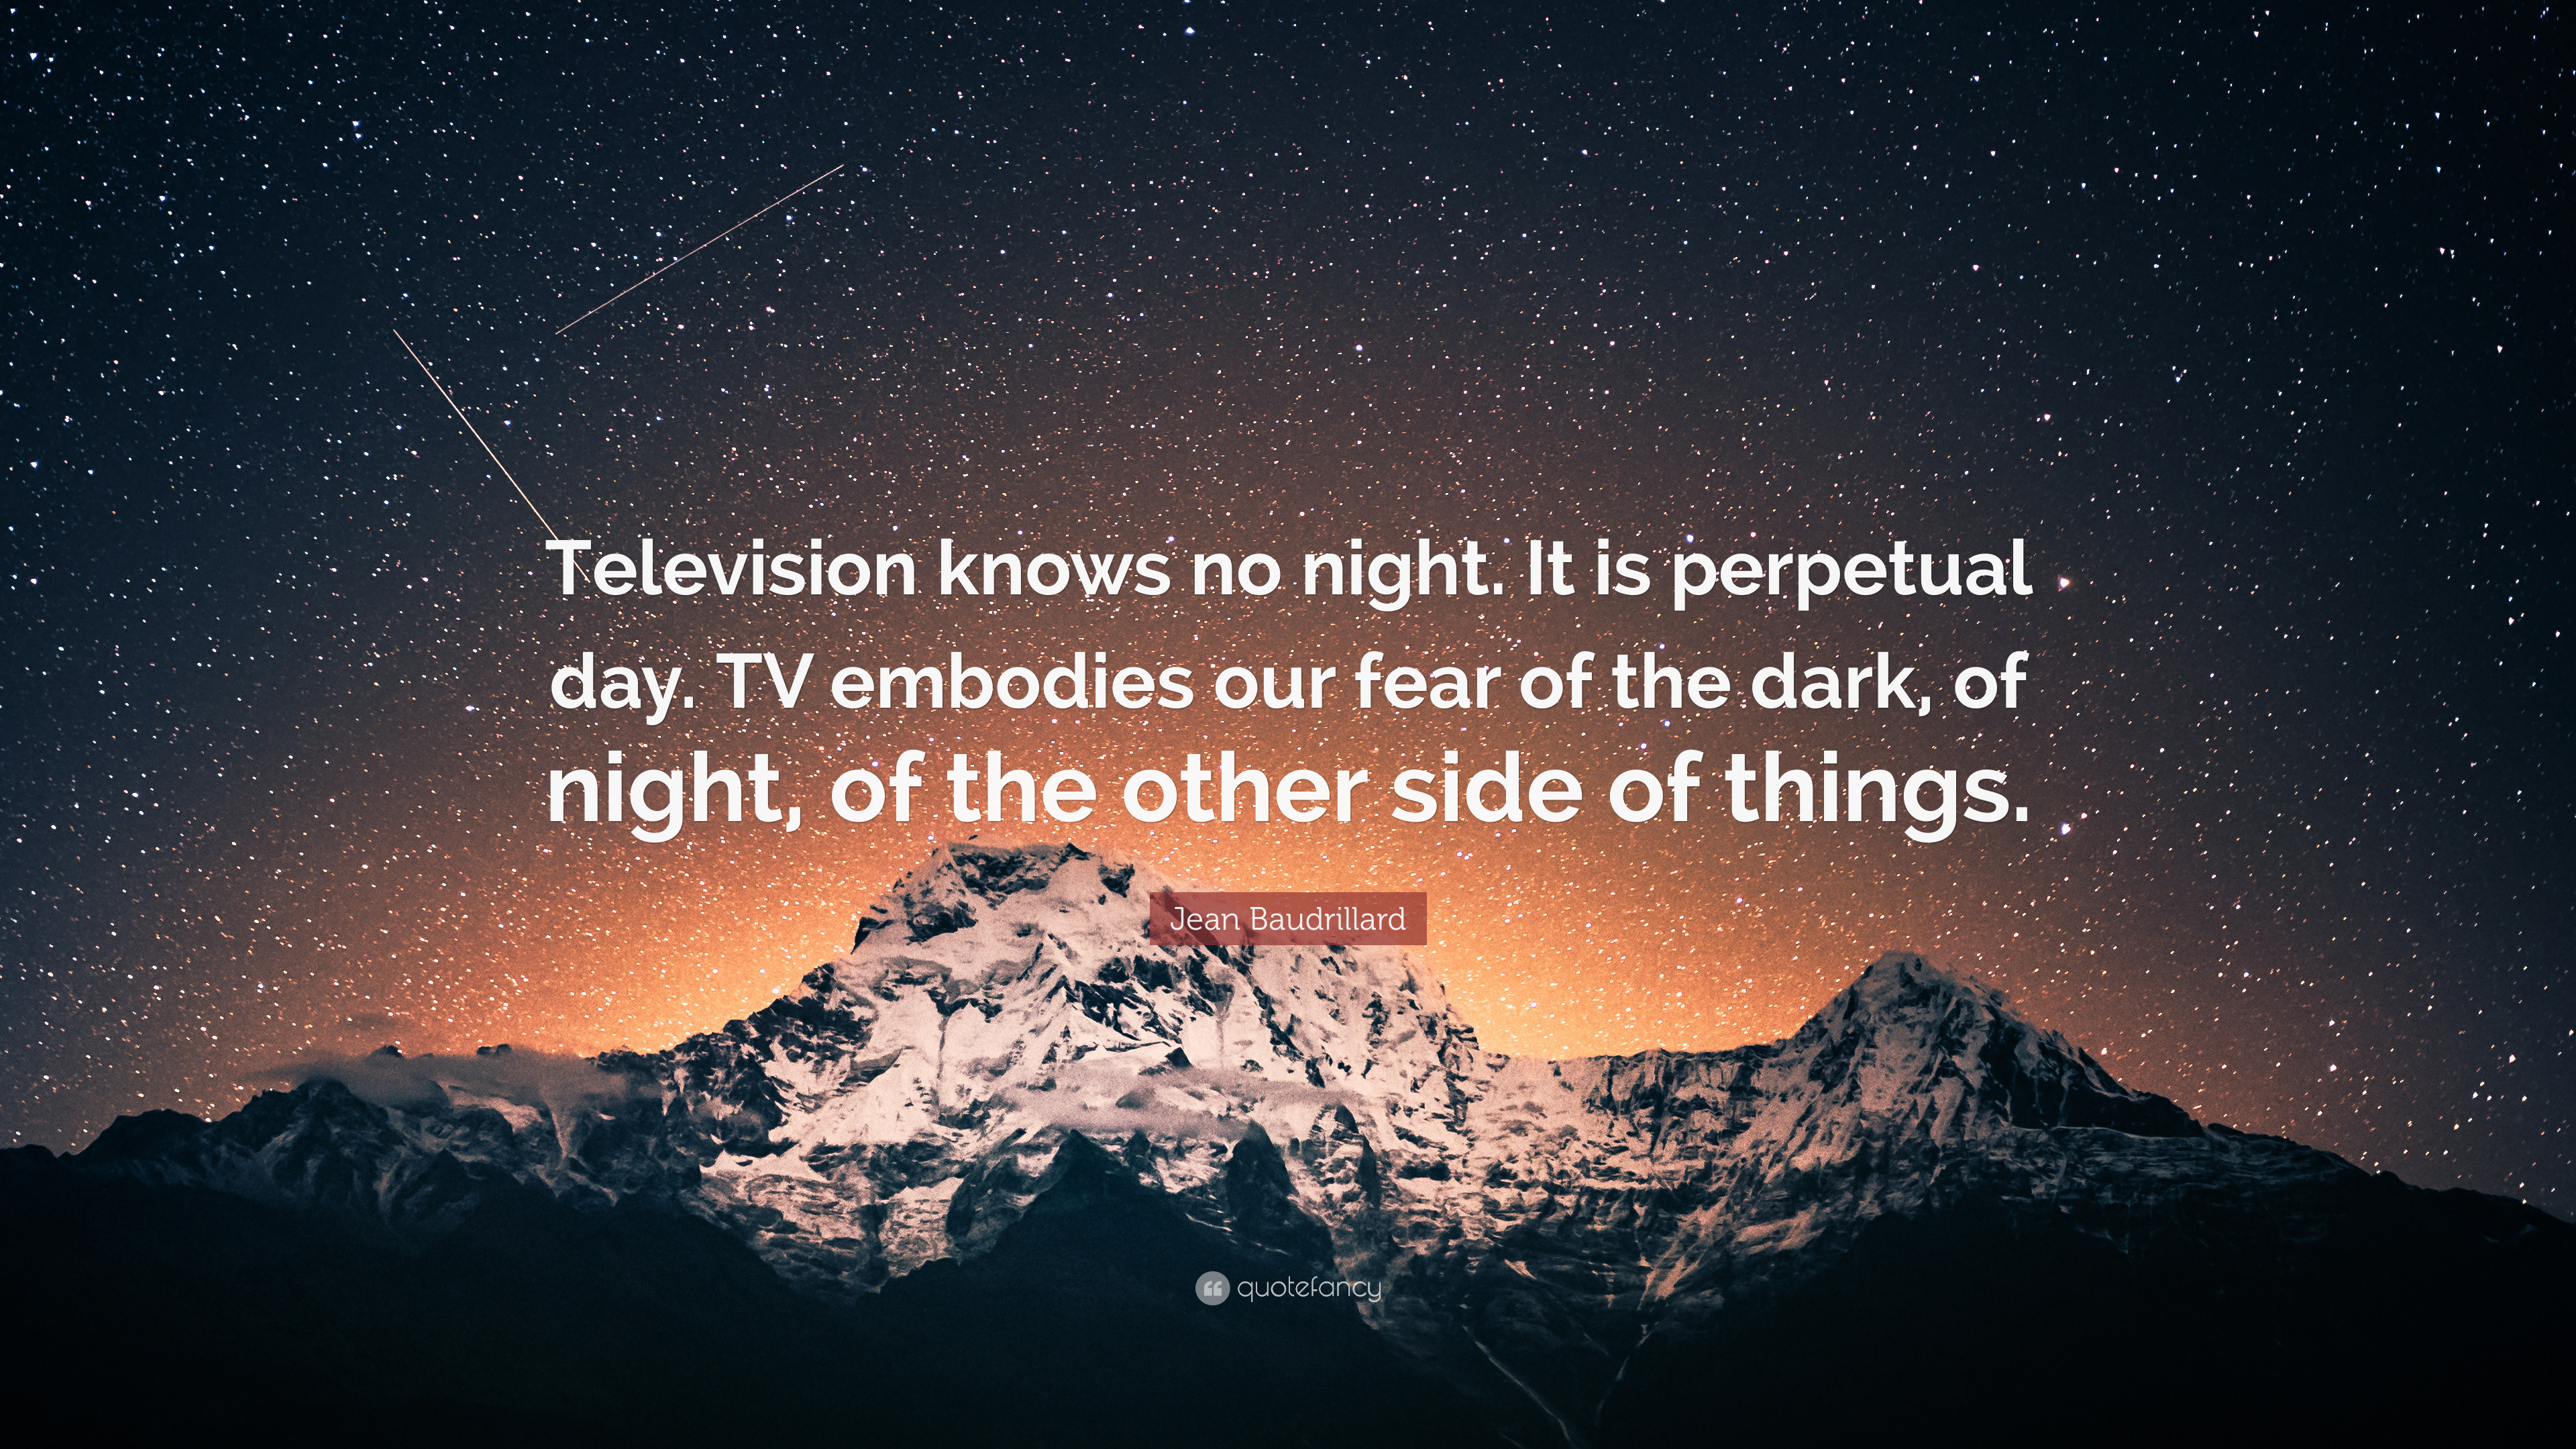 3840x2160 Jean Baudrillard Quote: “Television knows no night. It is perpetual day. TV